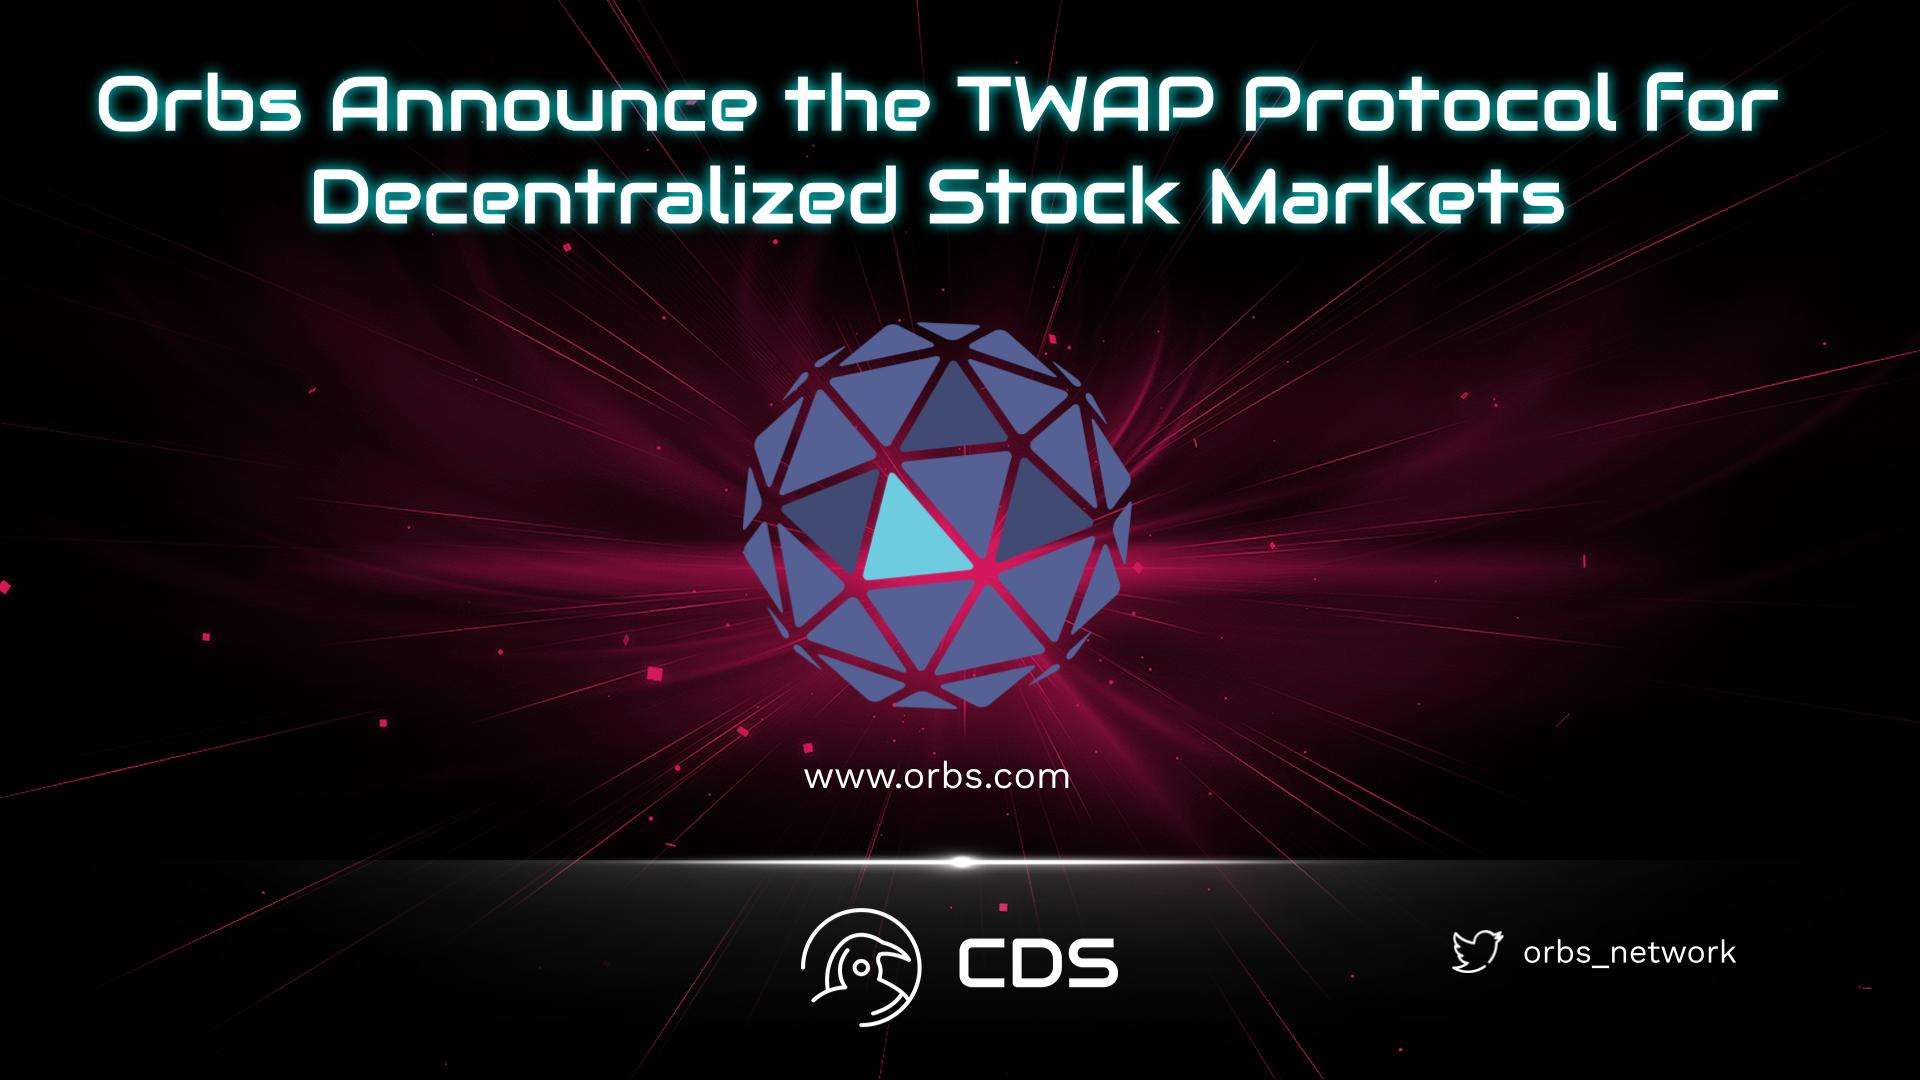 Orbs Announce the TWAP Protocol for Decentralized Stock Markets